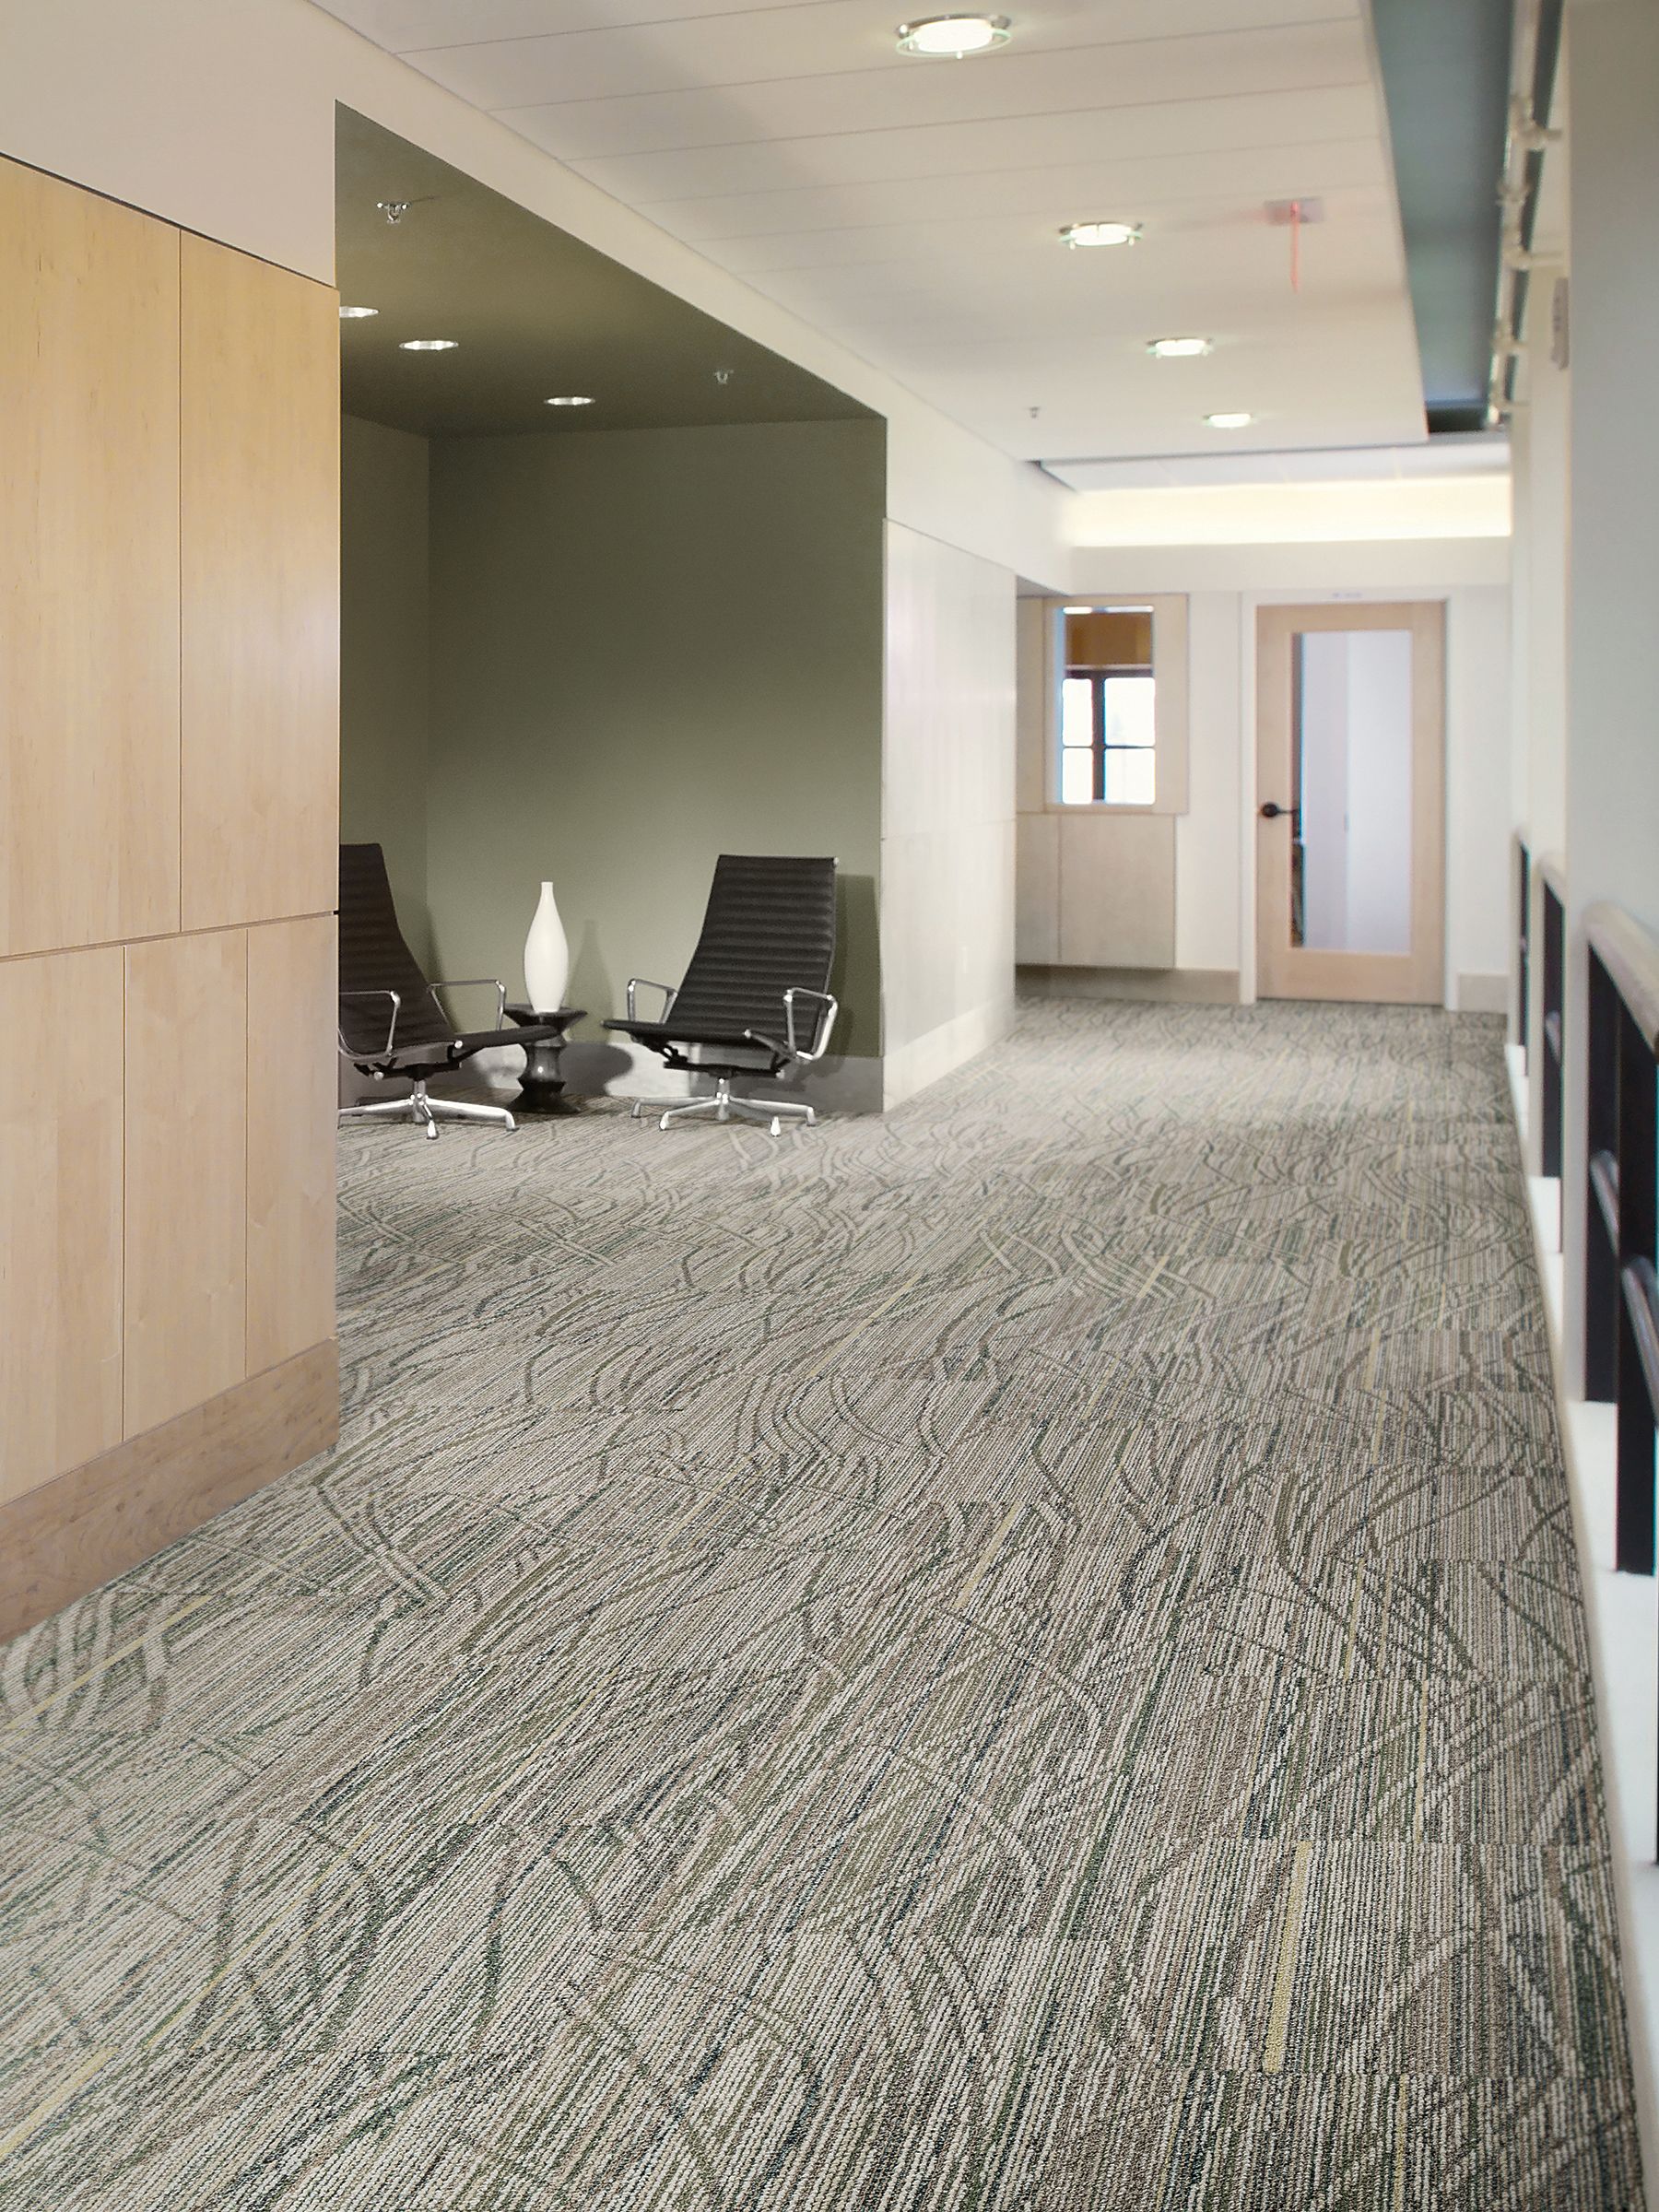 Interface Prairie Grass Loop carpet tile in corridor with seating area on side numéro d’image 2